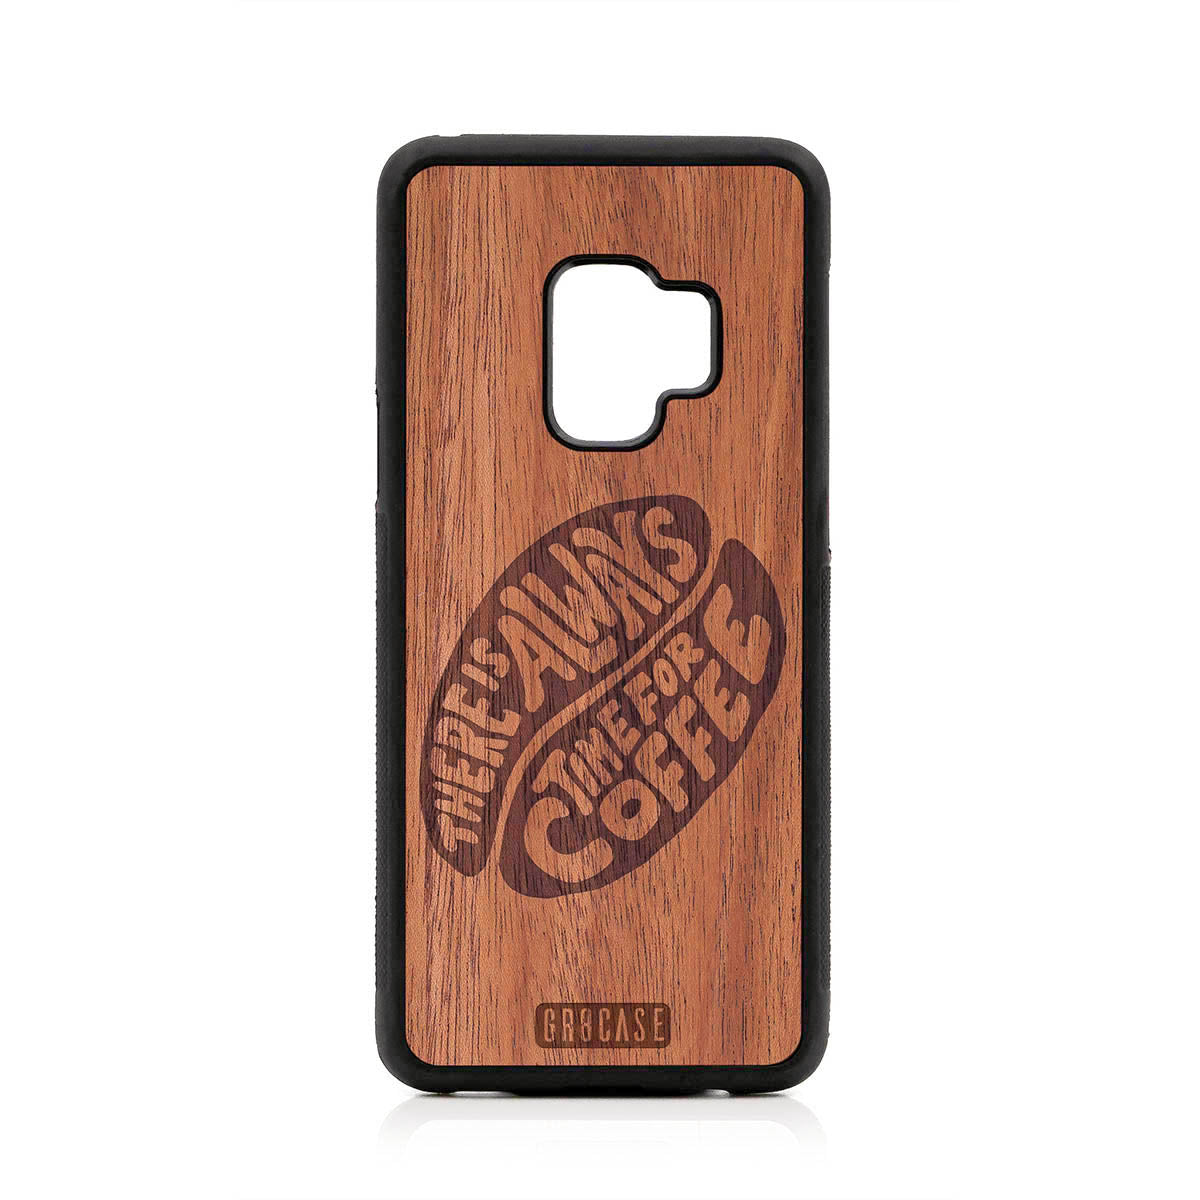 There Is Always Time For Coffee Design Wood Case For Samsung Galaxy S9